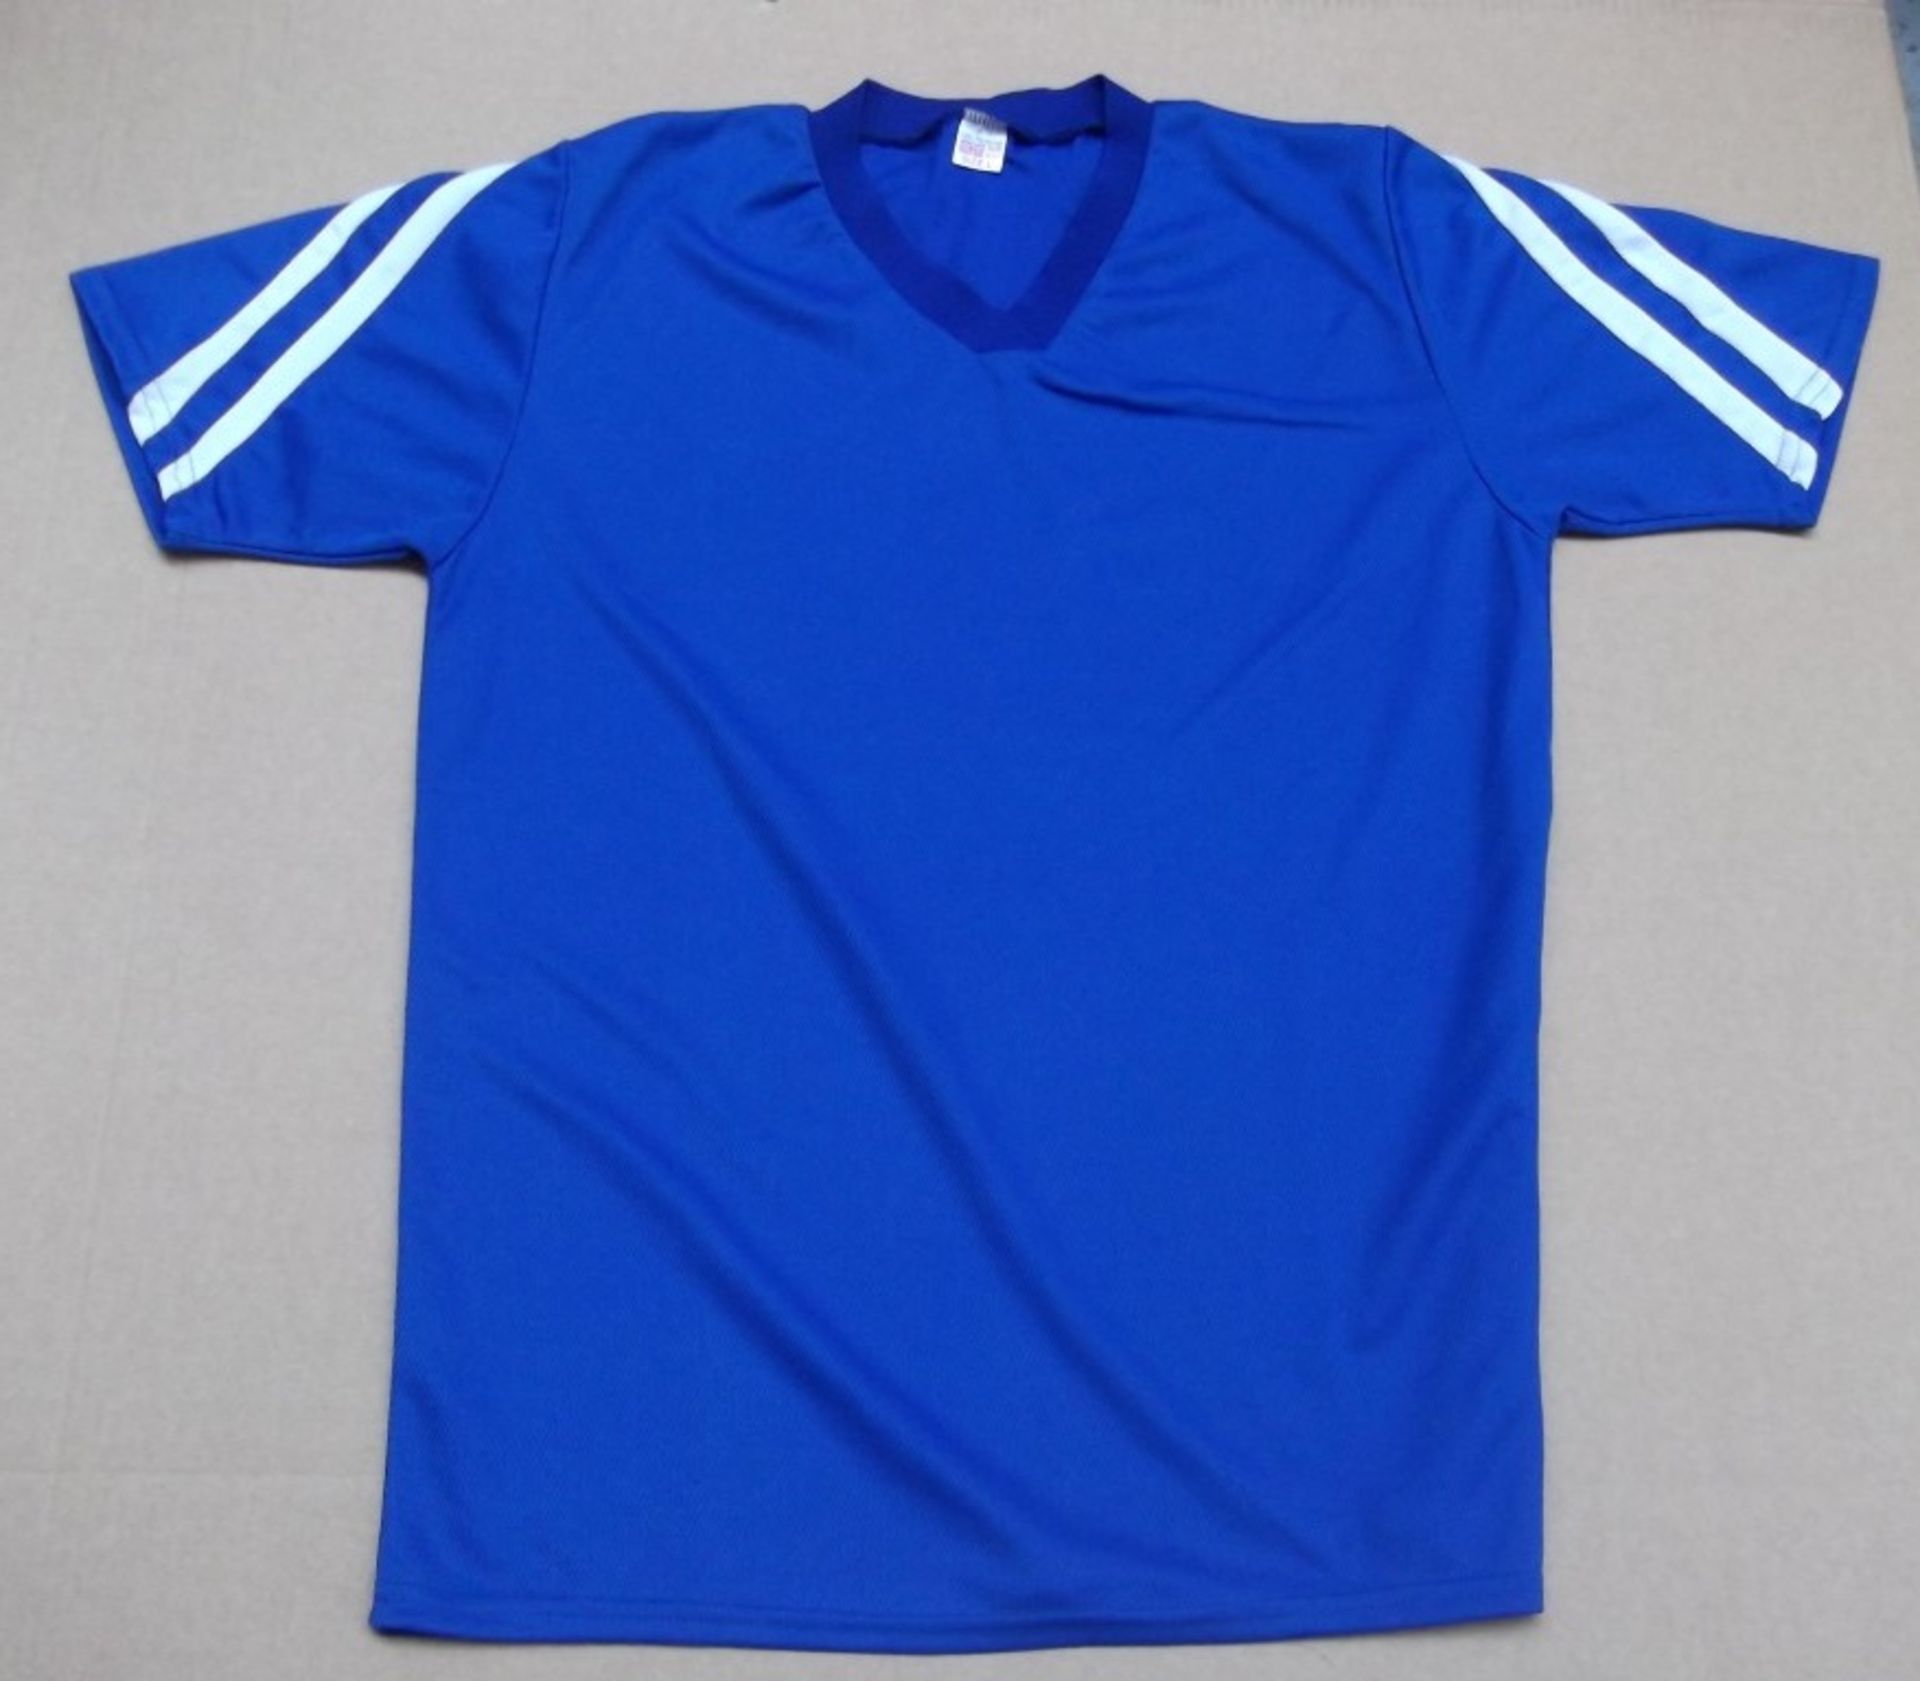 33 x Plain Football Short Sleeve Shirts - 2 Colours Supplied : Bright Blue With WHITE Detailing, and - Image 2 of 4